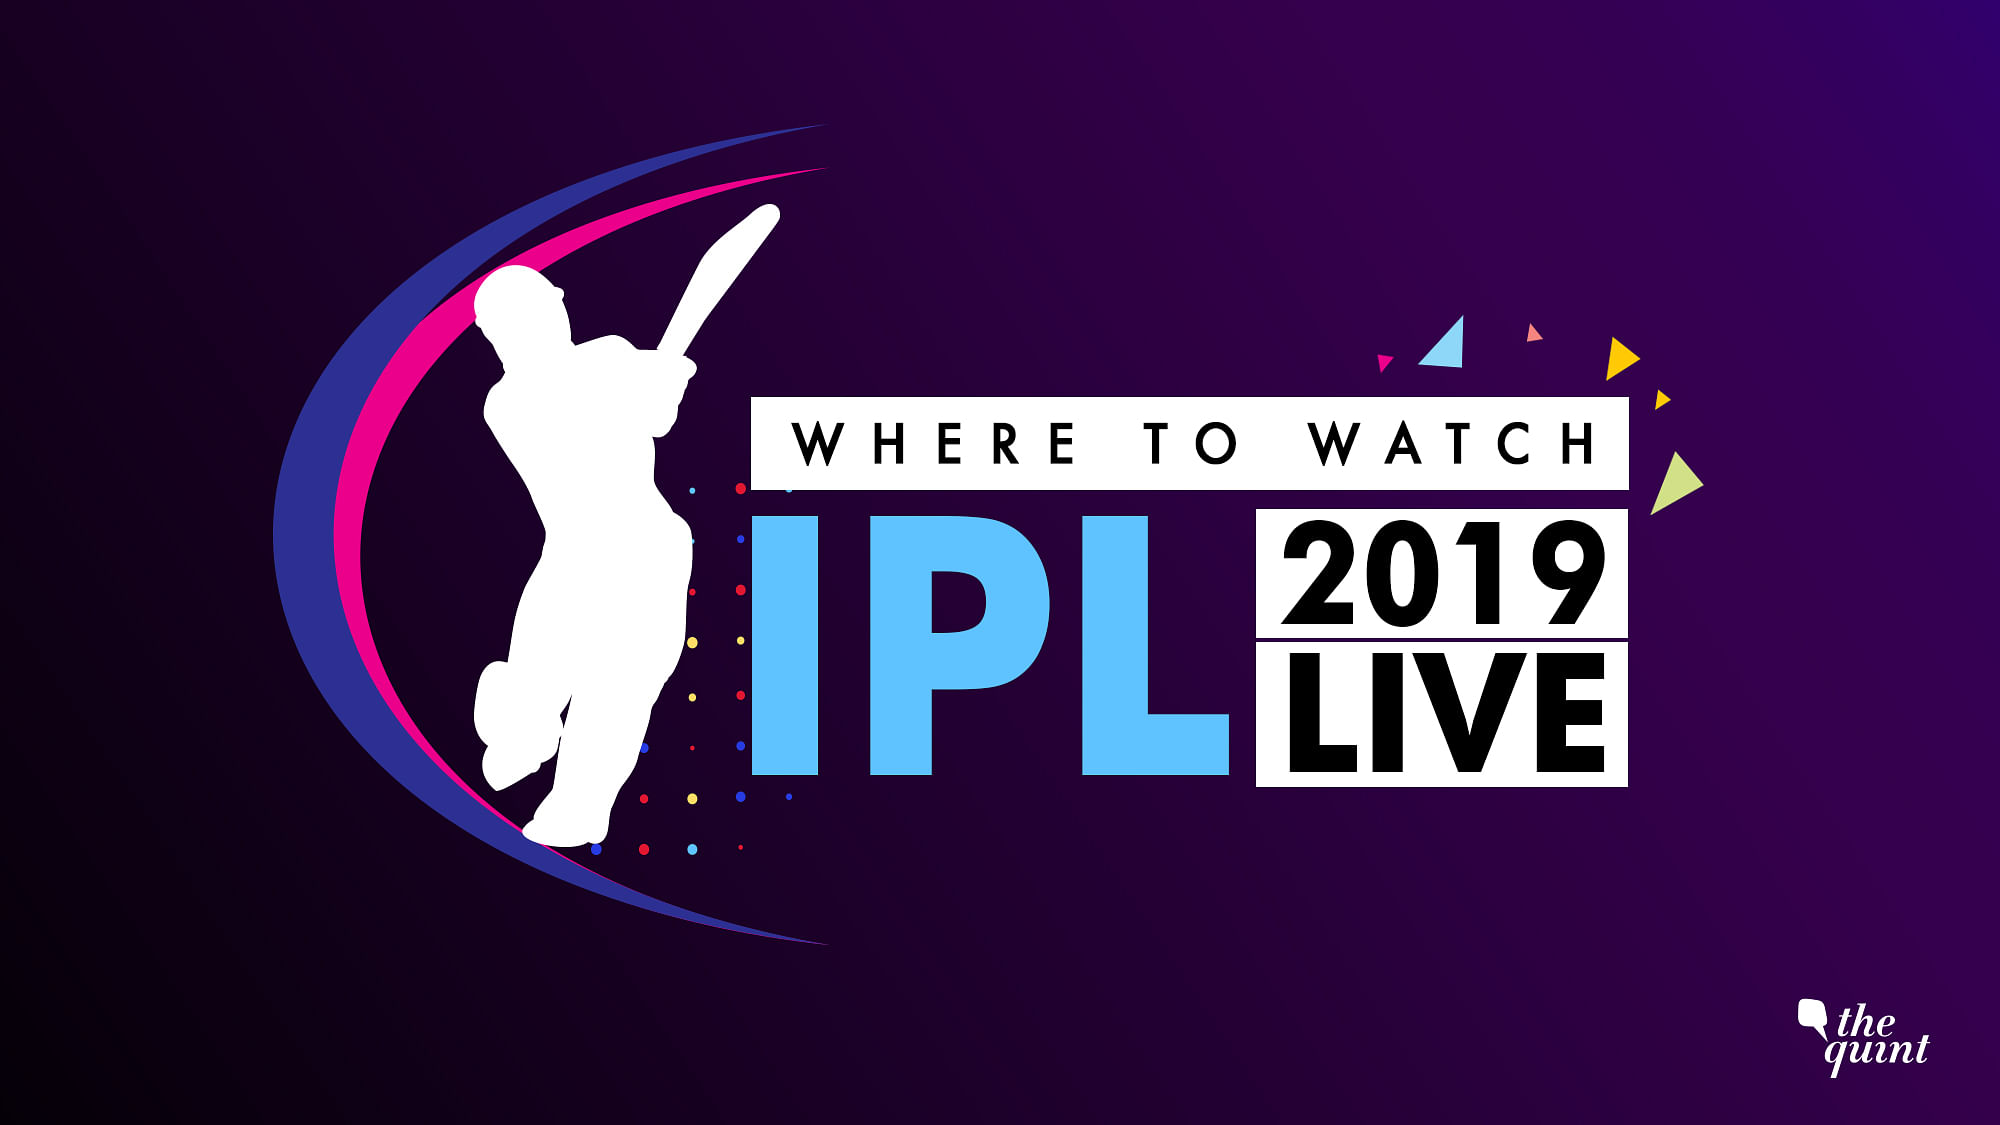  IPL 2019: Where to Watch Match Online and on TV, CSK vs DC